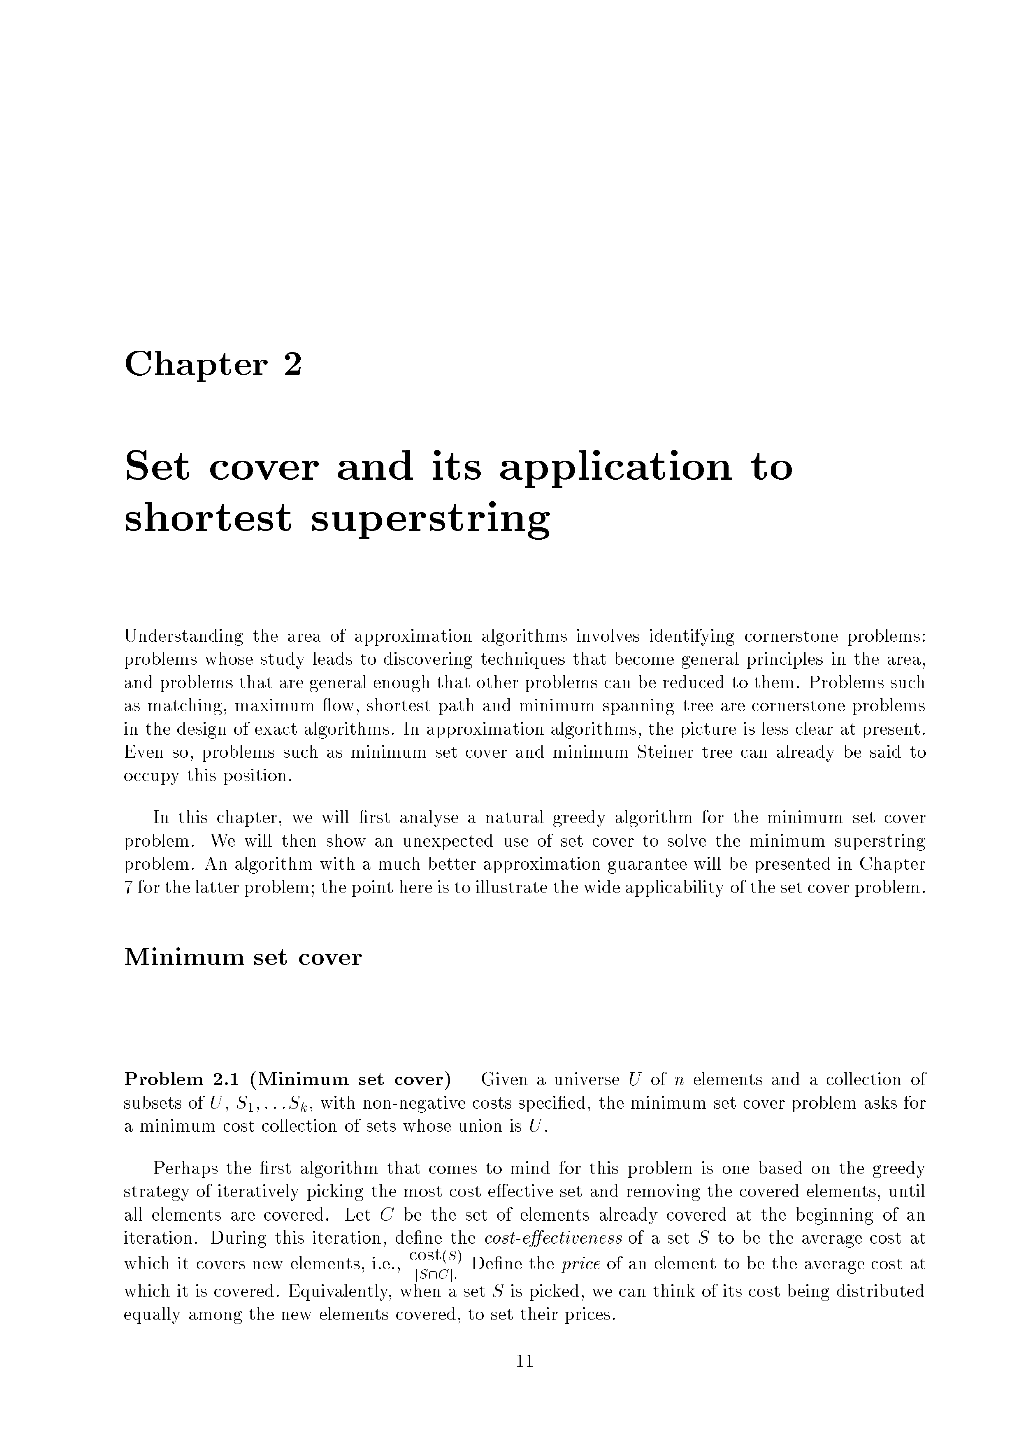 Set Cover and Its Application to Shortest Superstring